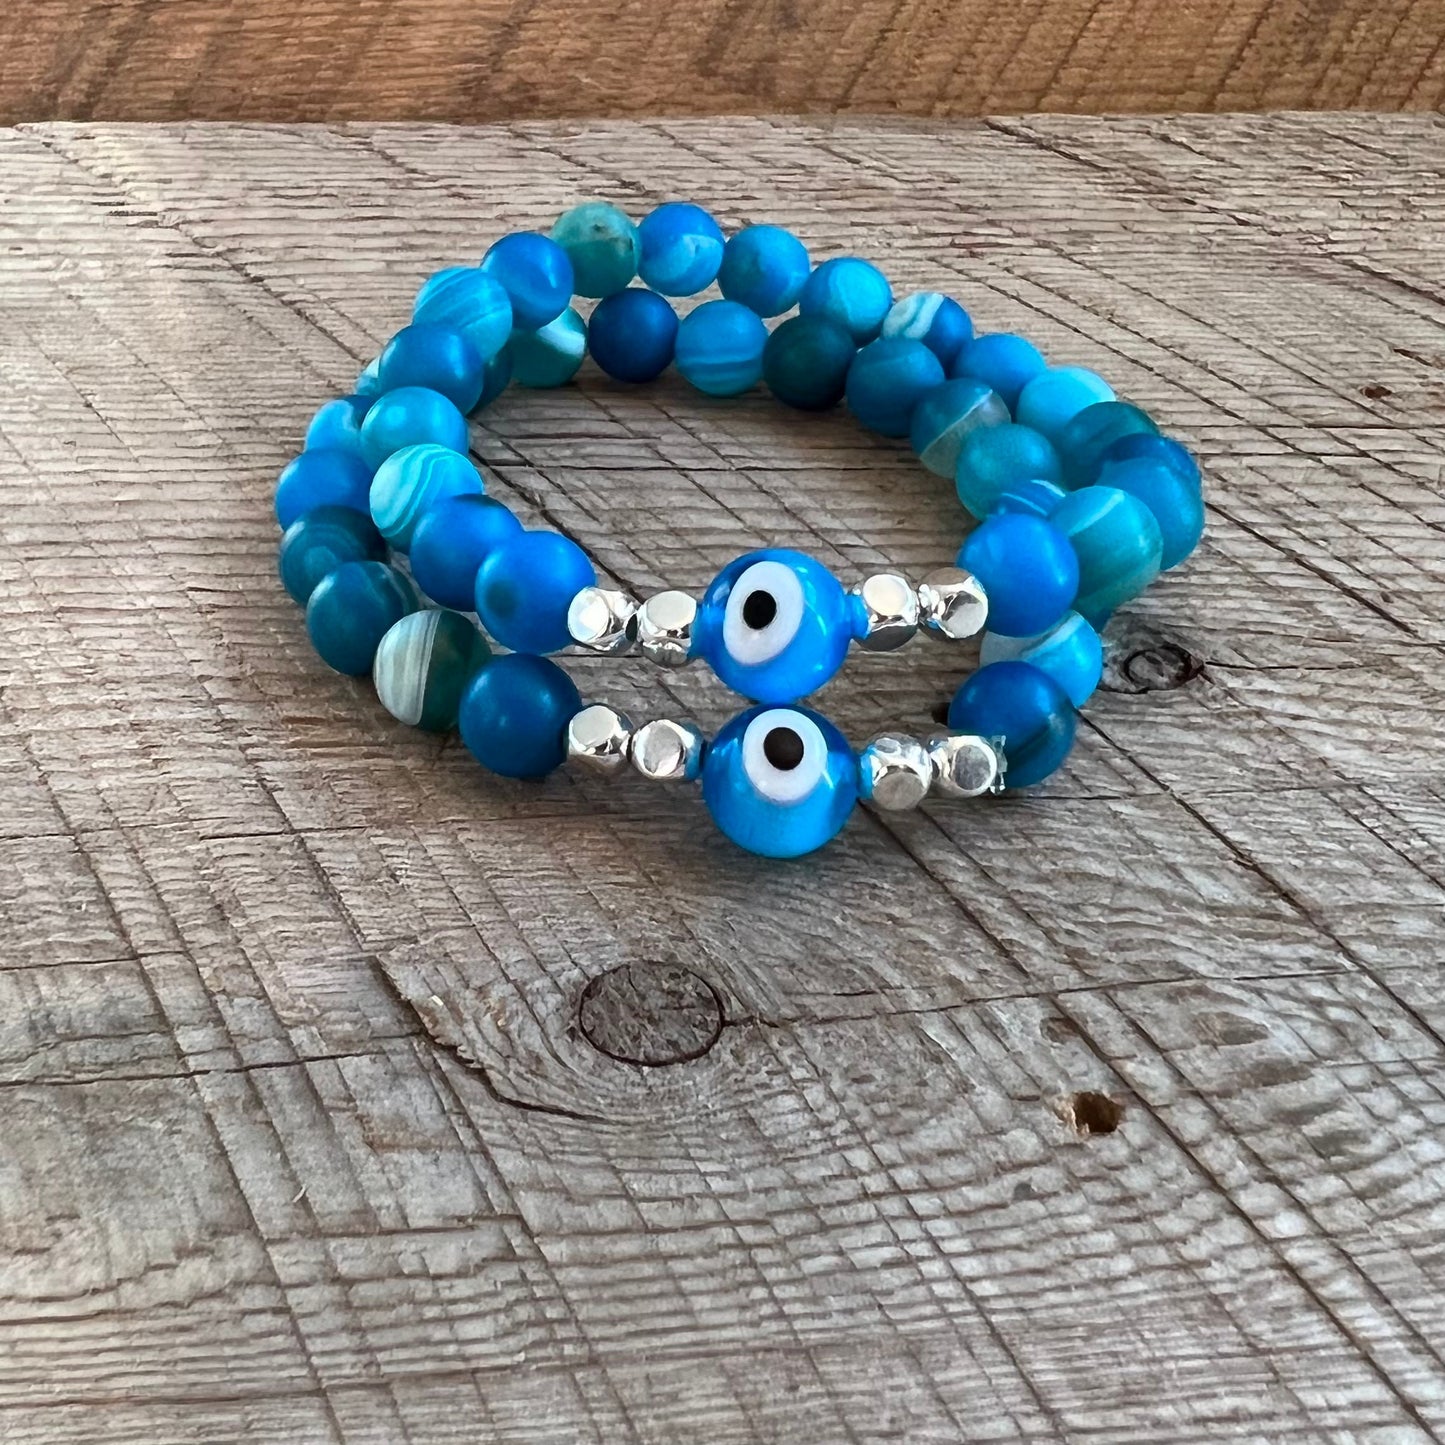 SariBlue® Ultra Blue Agate with Light Blue Evil Eye and Sterling Silver Beads Bracelet